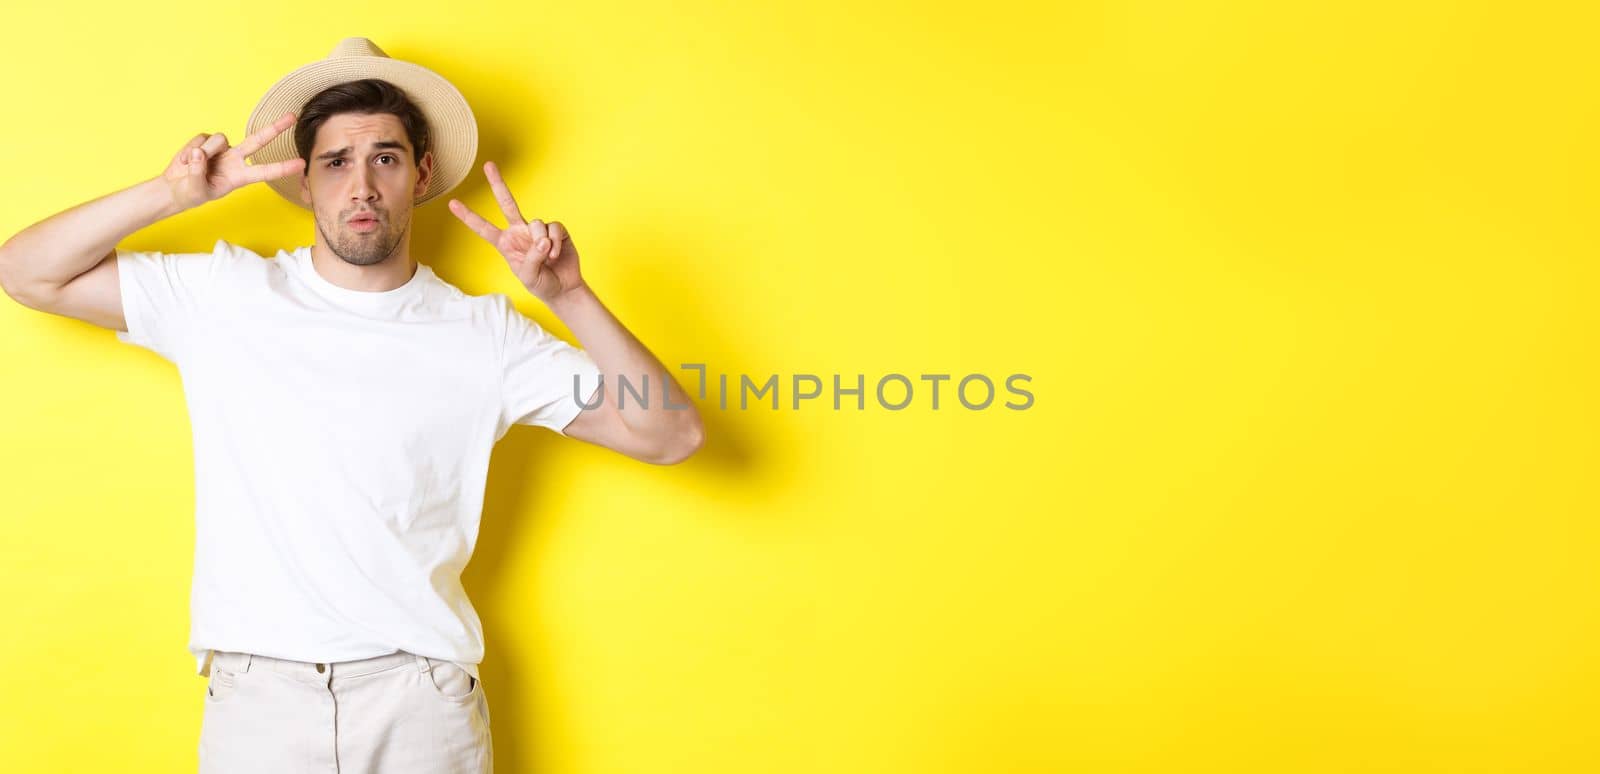 Concept of tourism and vacation. Cool guy taking photo on holidays, posing with peace signs and wearing straw hat, standing against yellow background.